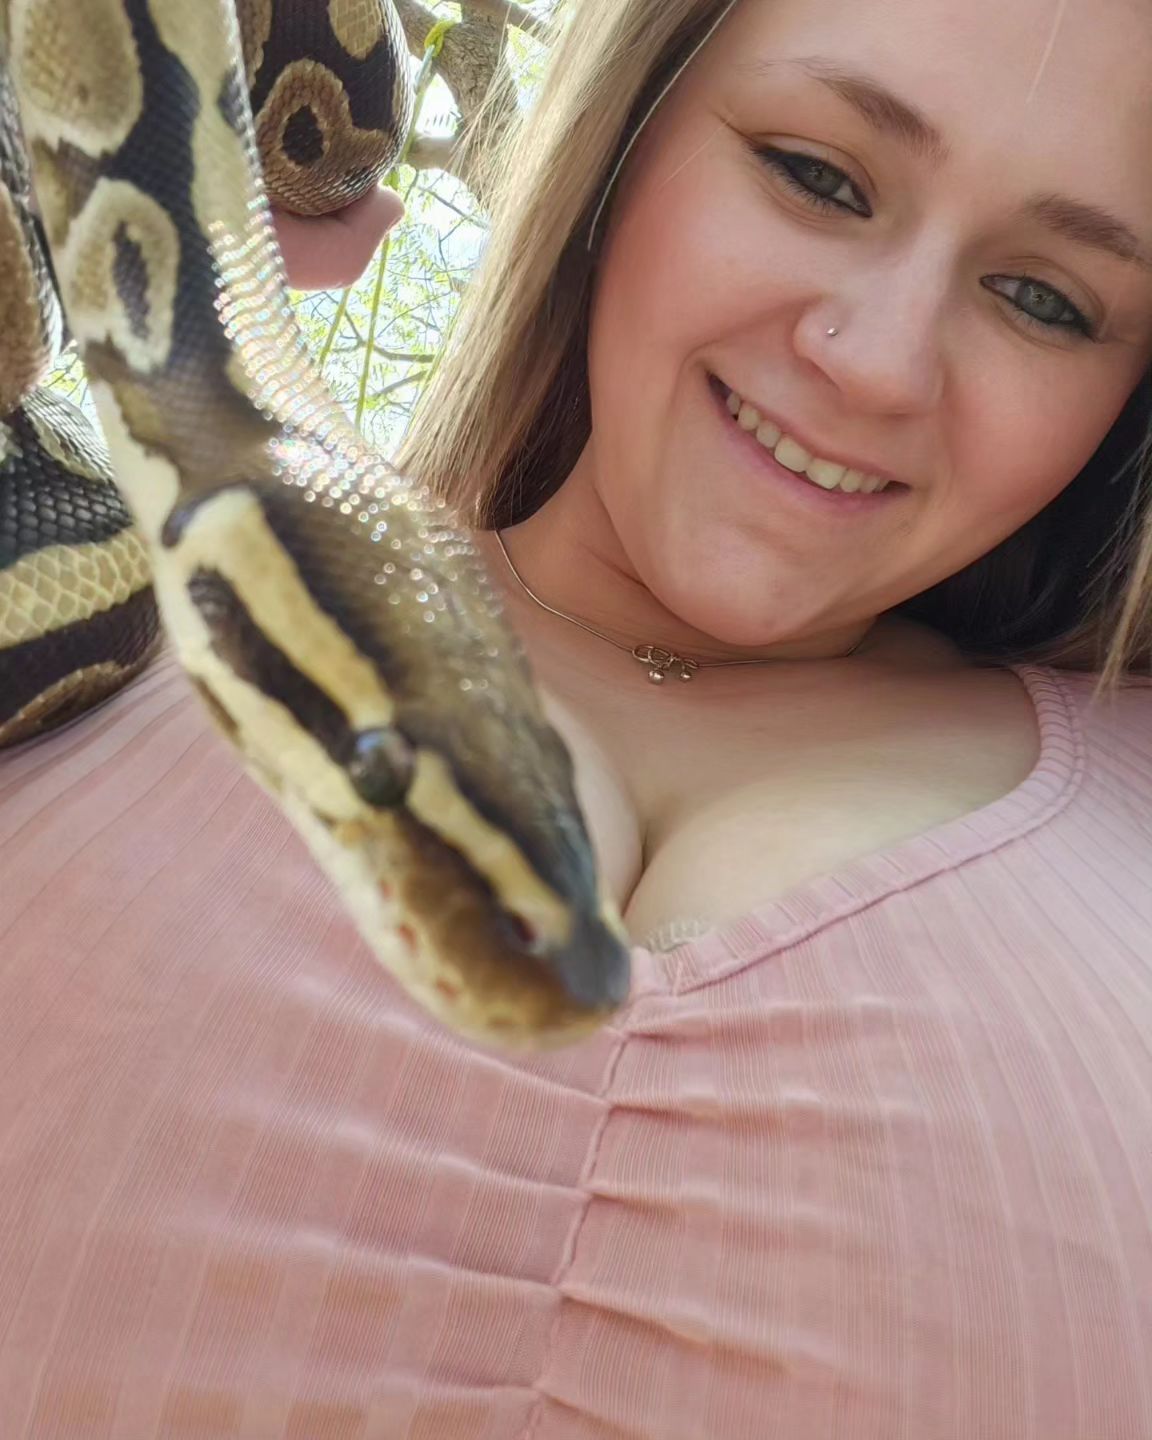 Took My Baby Outside Today!! 🥰🐍 
Can you guess how many pets I have? 🤔